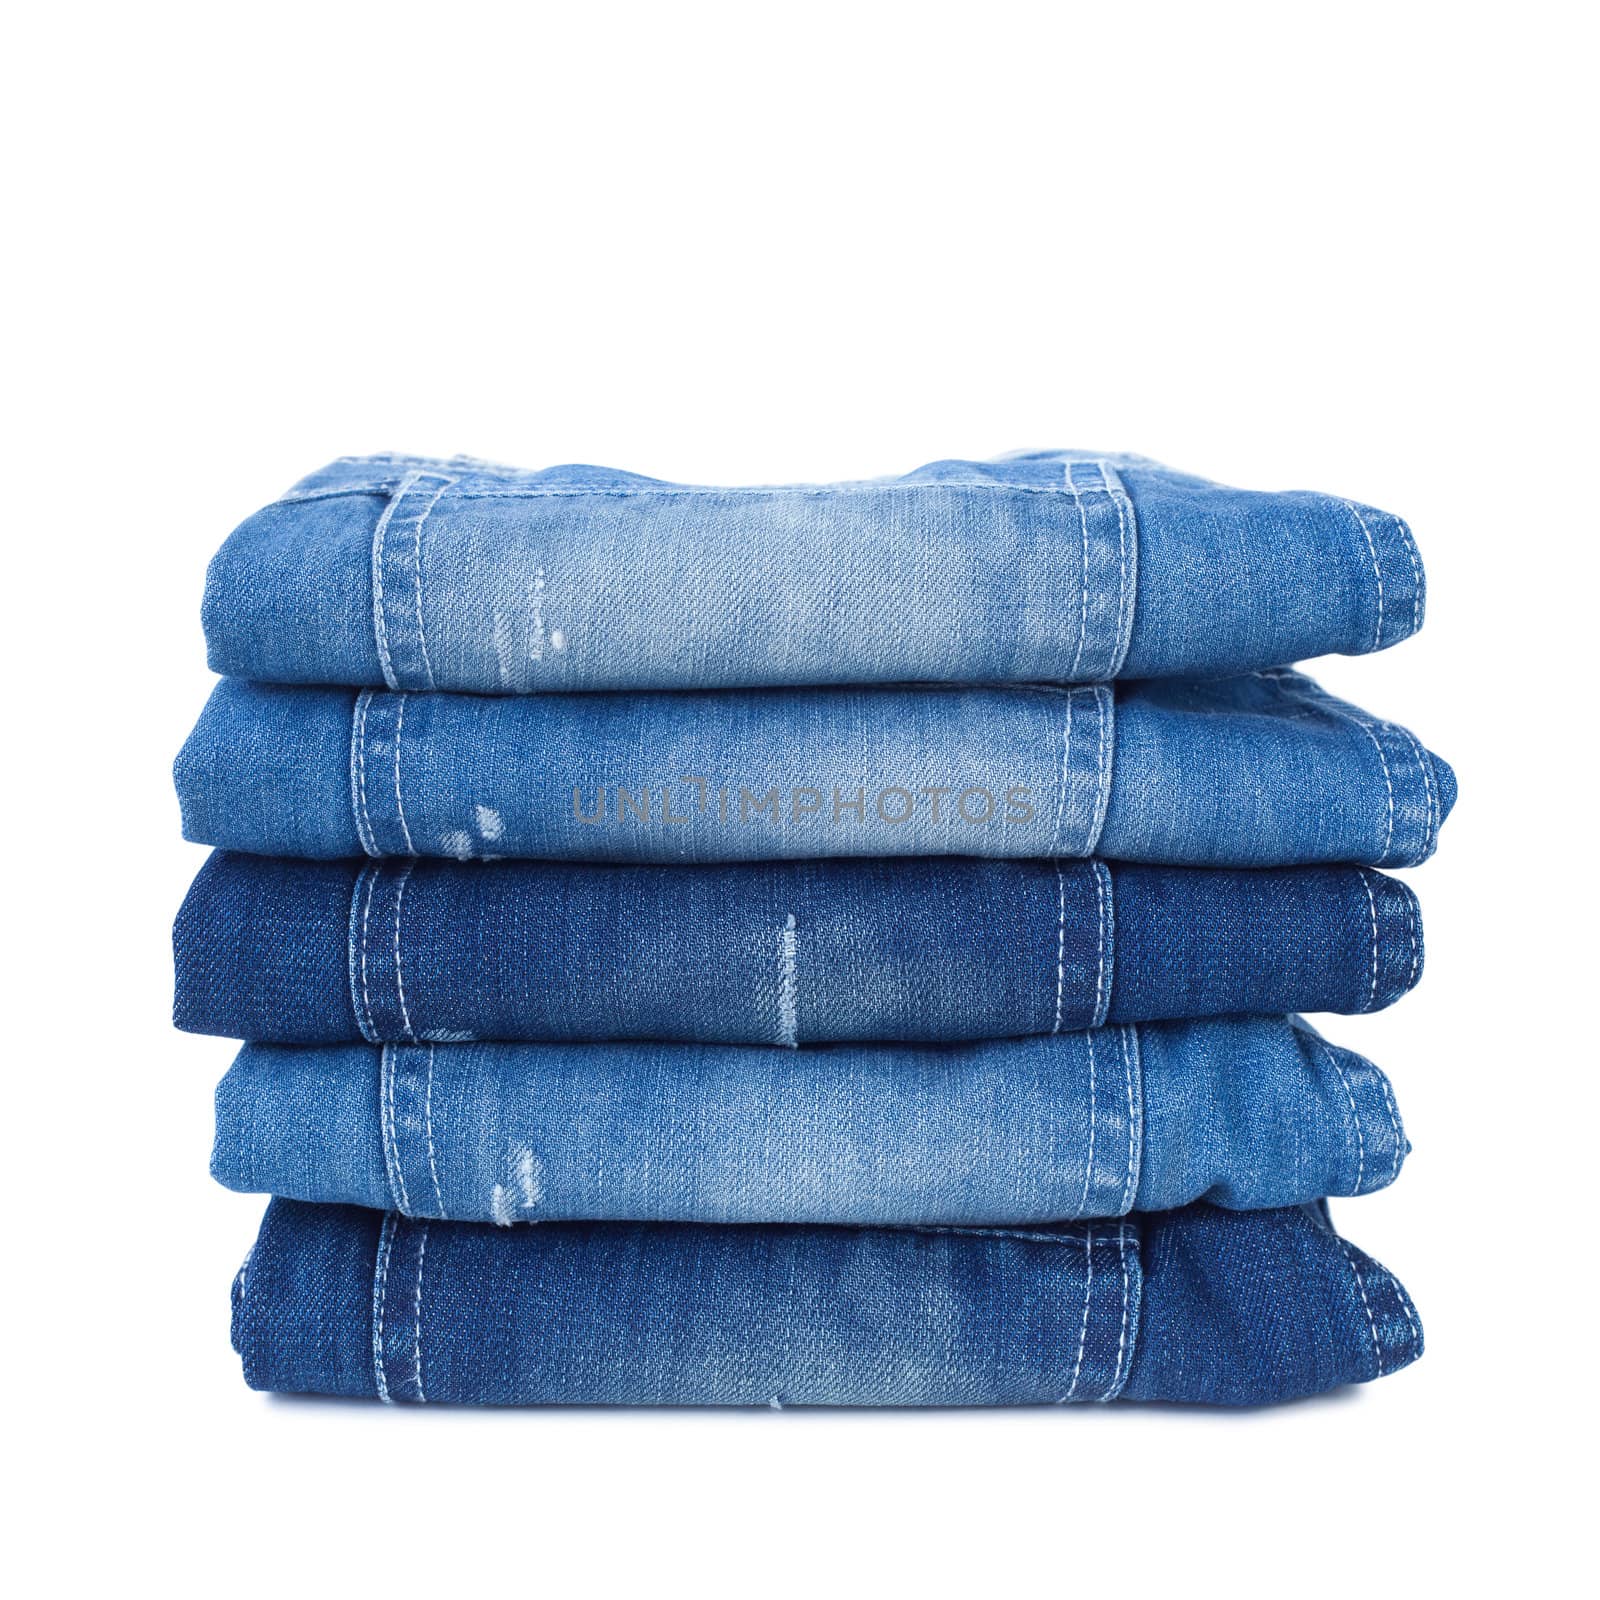 Stack of blue jeans isolated on white background by foto76